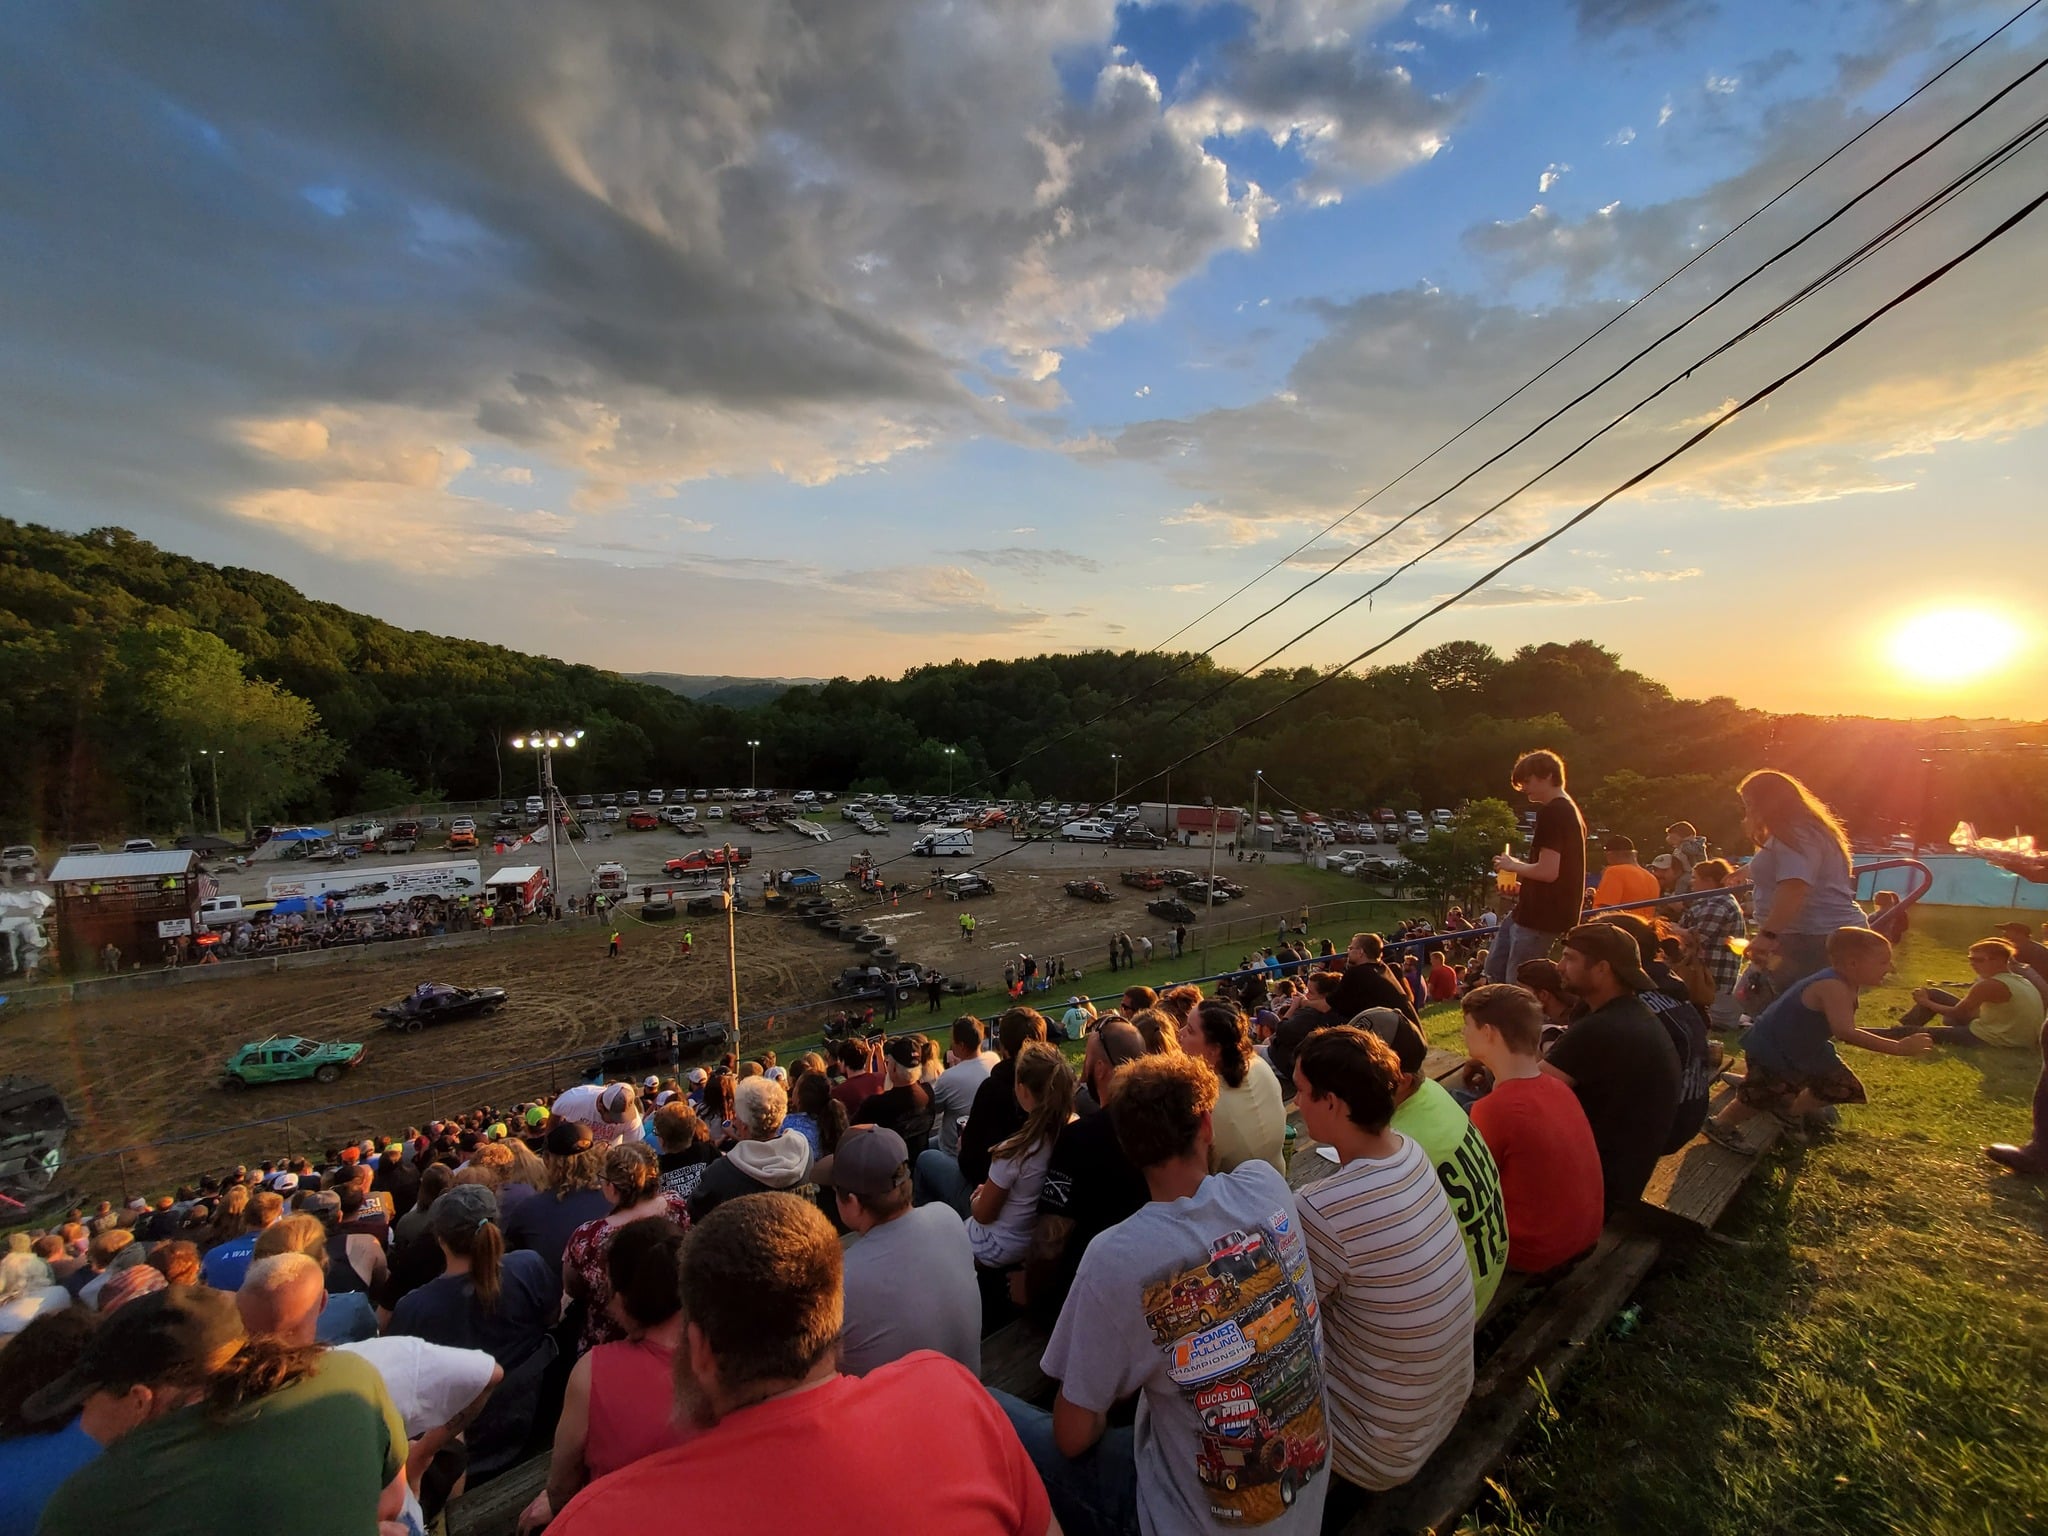 Photograph from the grandstand overlooking the Demolition Derby at the Jacktown Fair.